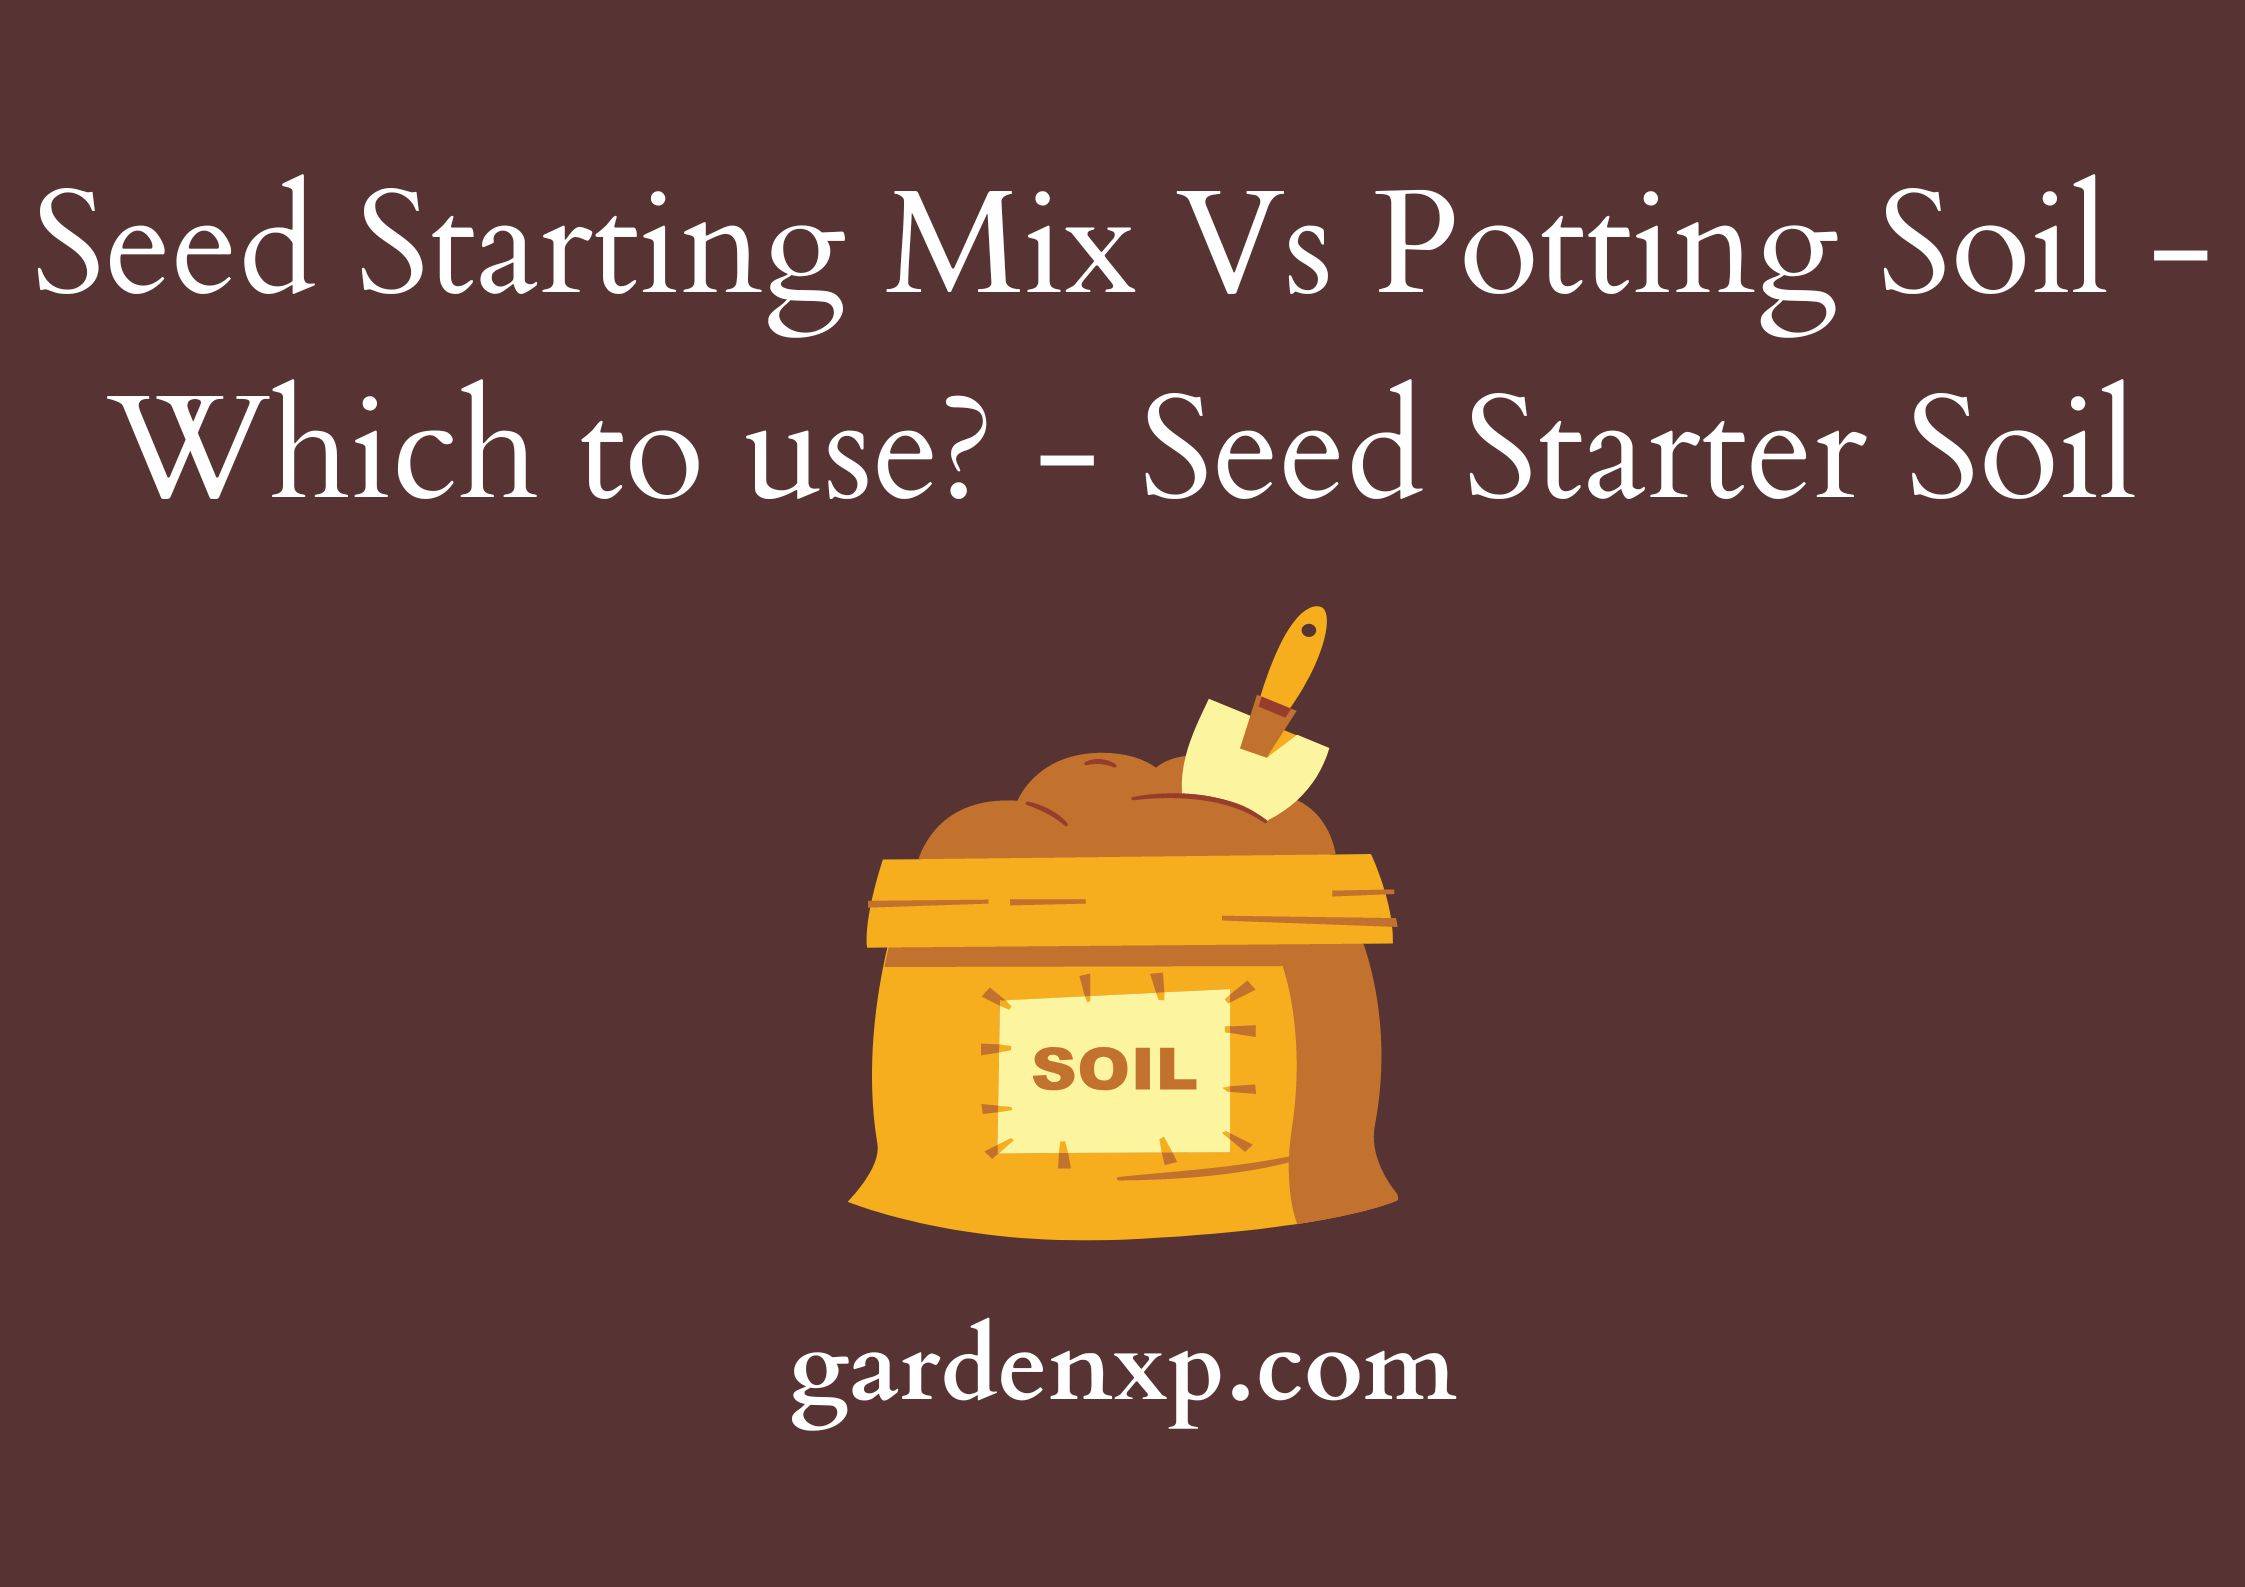 Seed Starting Mix Vs Potting Soil - Which to use? - Seed Starter Soil